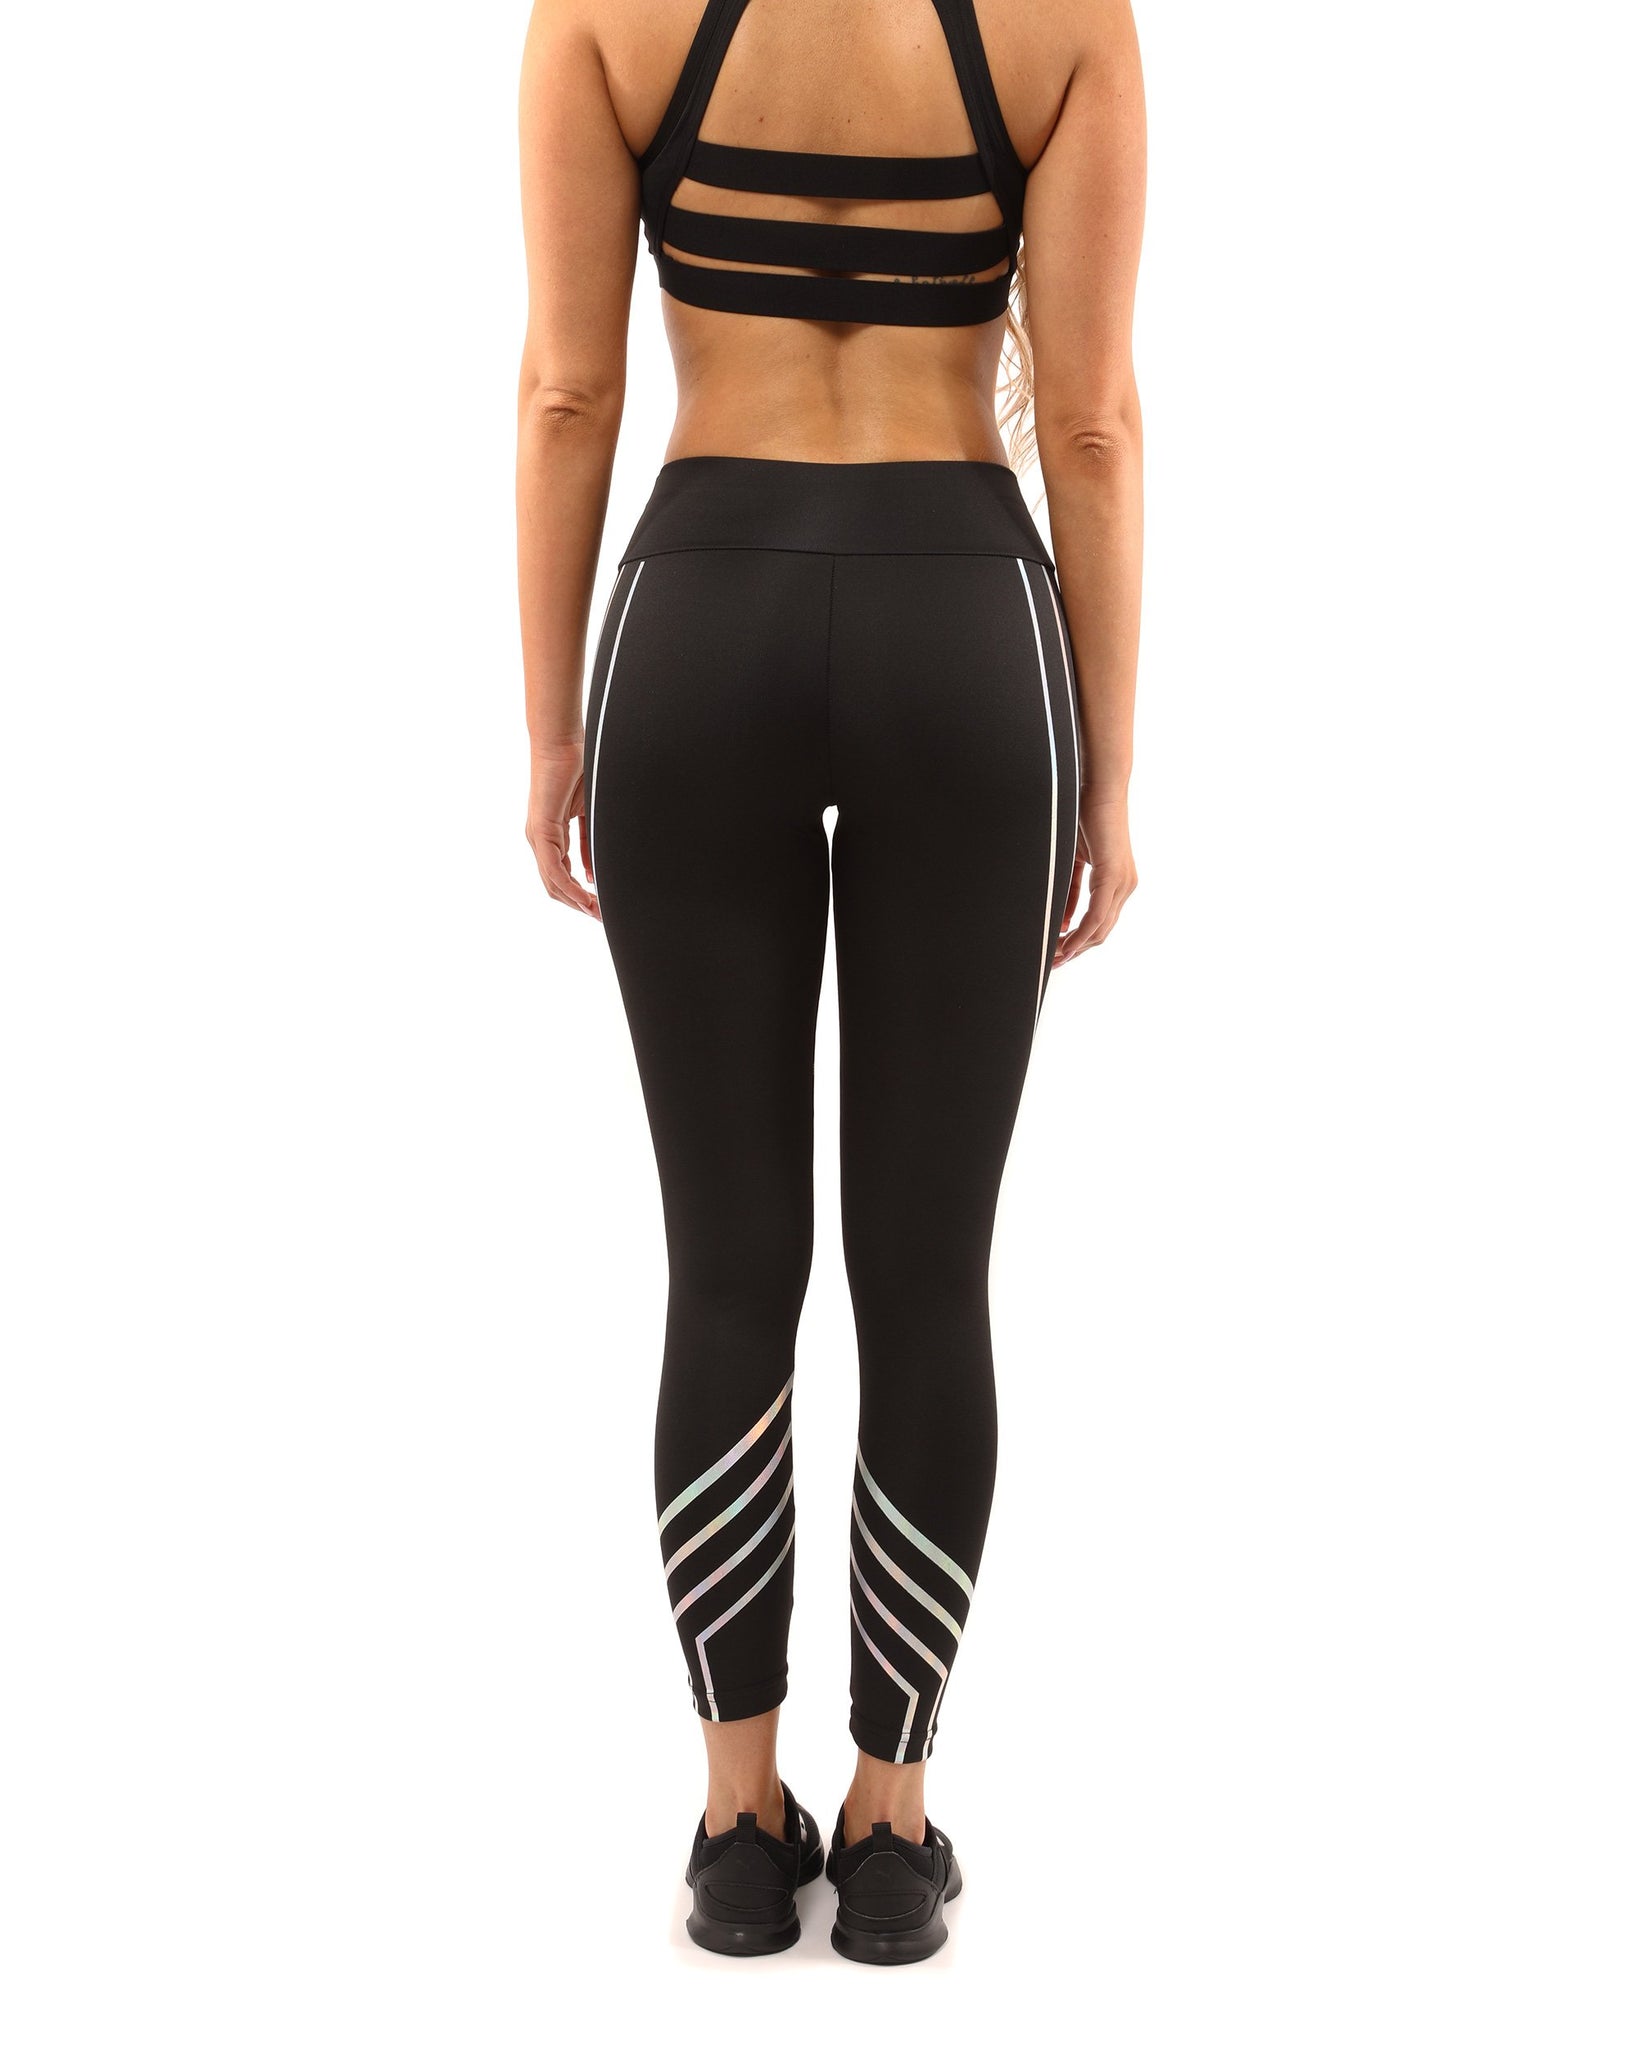 Spyder Active Performance Sports leggings base layer Size L Size L - $50  New With Tags - From Raebabys